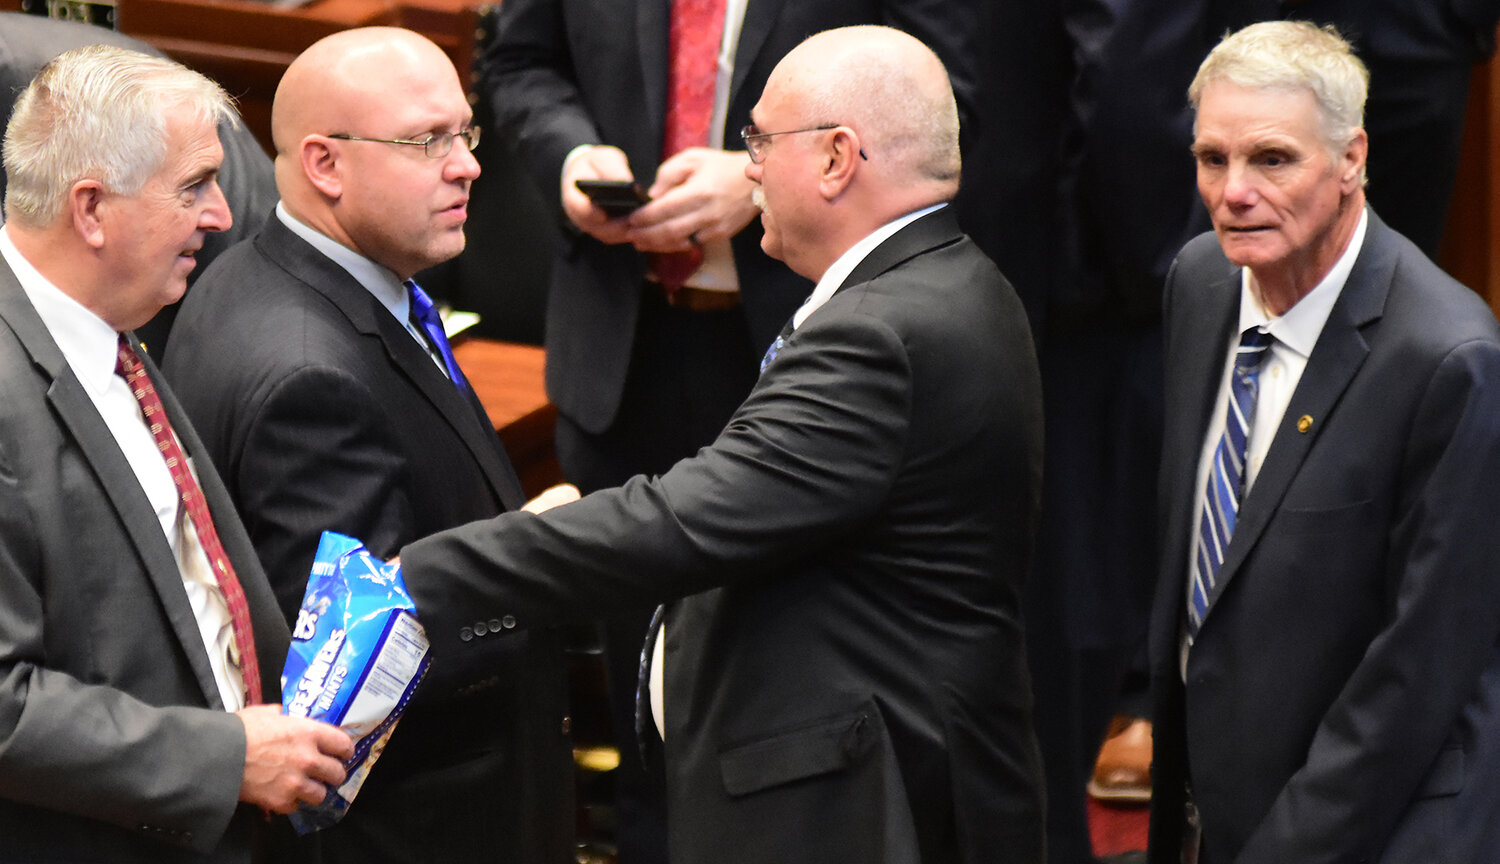 STATE REP. BRUCE SASSMANN passes out Life Savers candy to fellow representatives Jan. 3 as the House prepared to convene for the first time in the final session of the 102nd General Assembly.